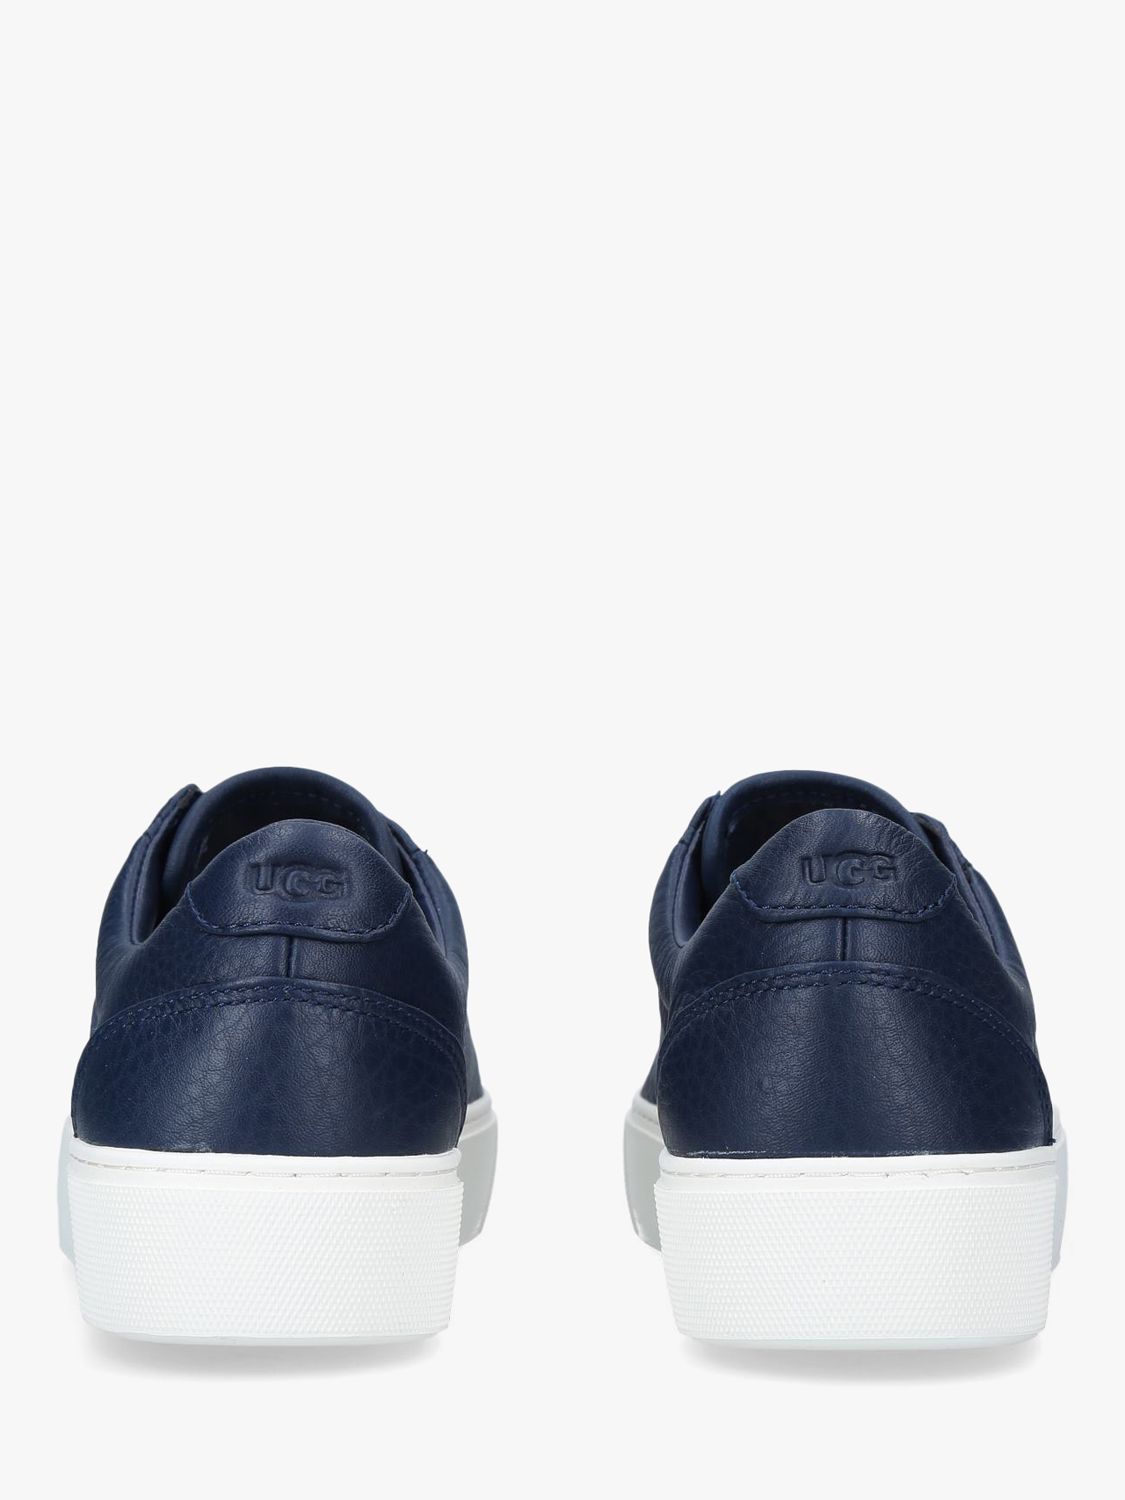 UGG Zilo Leather Lace Up Trainers, Navy 